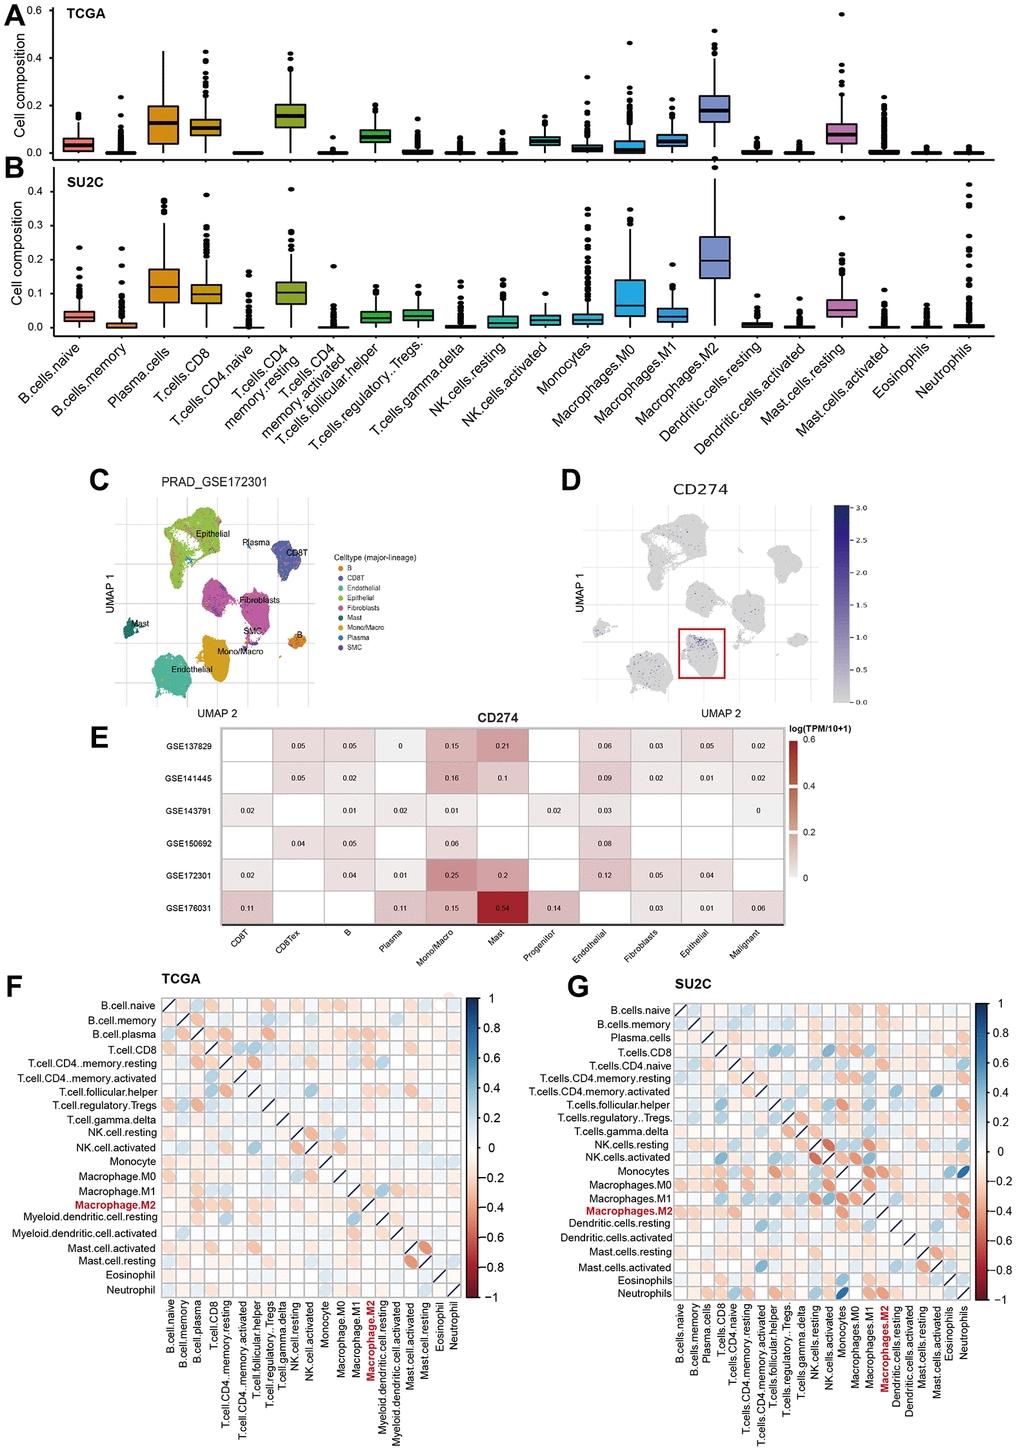 M2-TAMs are major immune-modulator in PCa. (A, B) The landscape of 22 immune cells in PCa. The infiltration factions of the 22 analyzed cell types were calculated by CIBERSORTx program in TCGA-PRAD (A) and prad